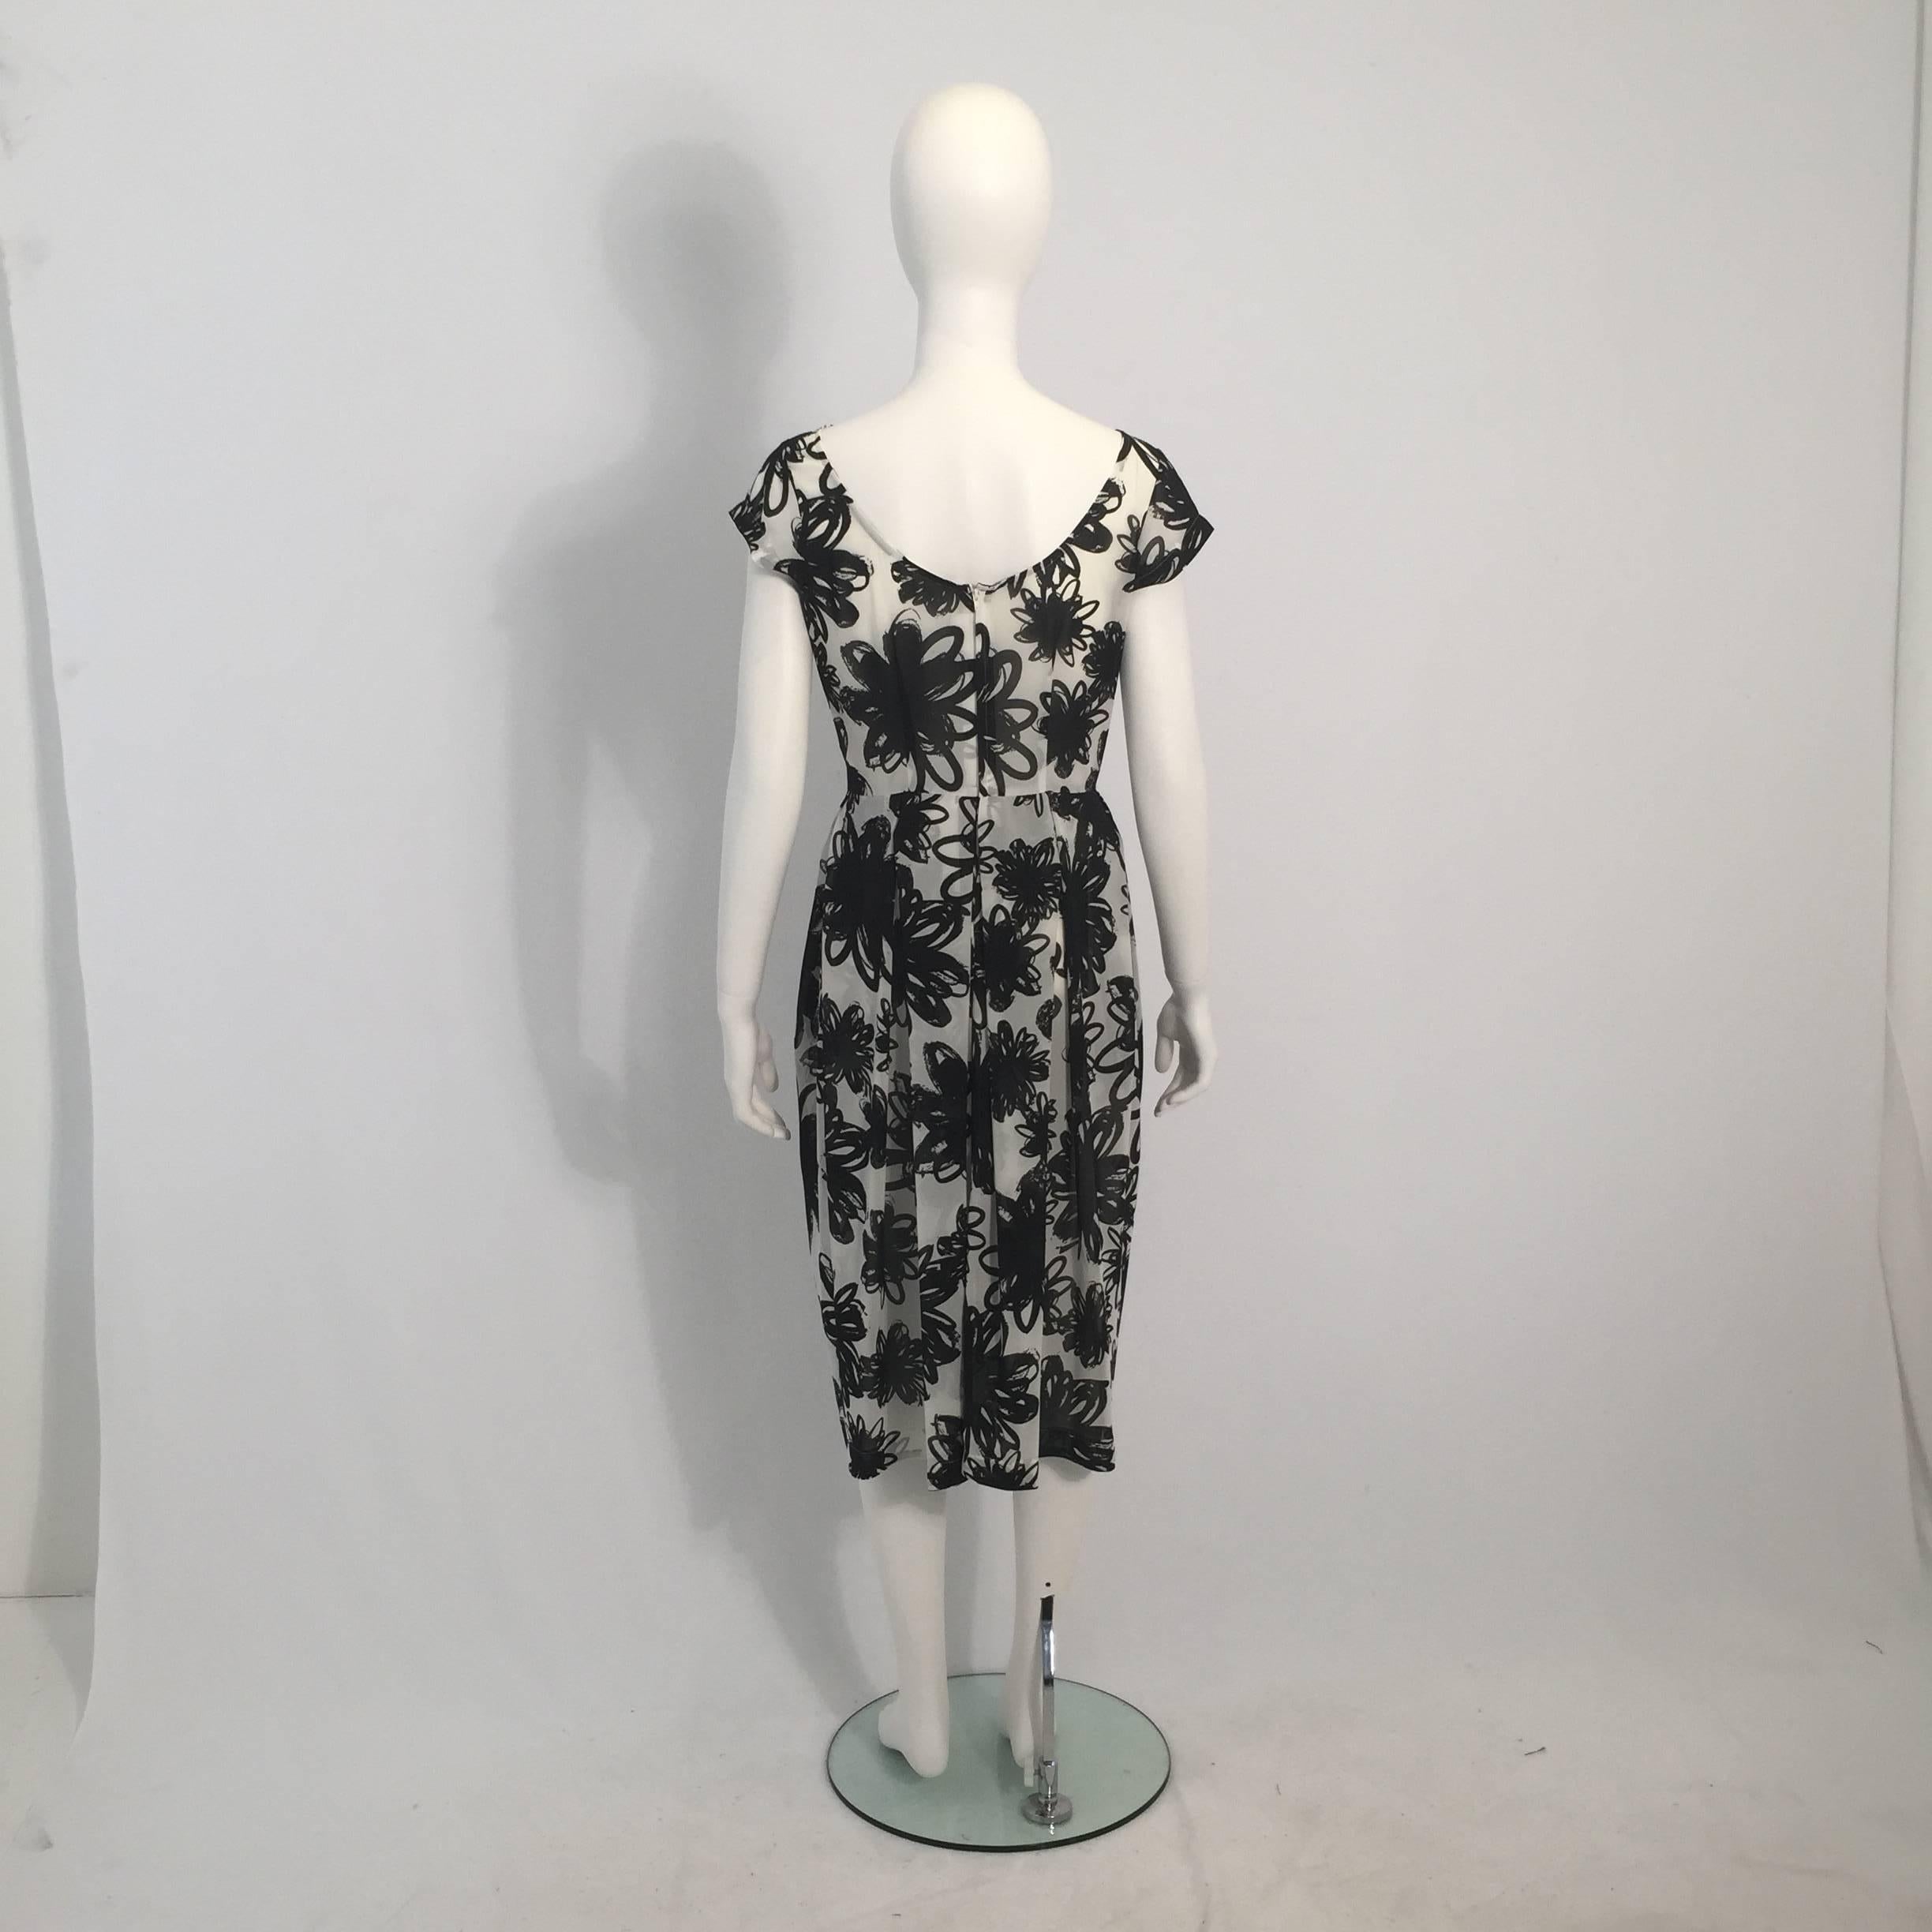 Comme des Garçons 1990's black and white, abstract floral-print, dress.

For International orders, please contact us for a shipping quote.